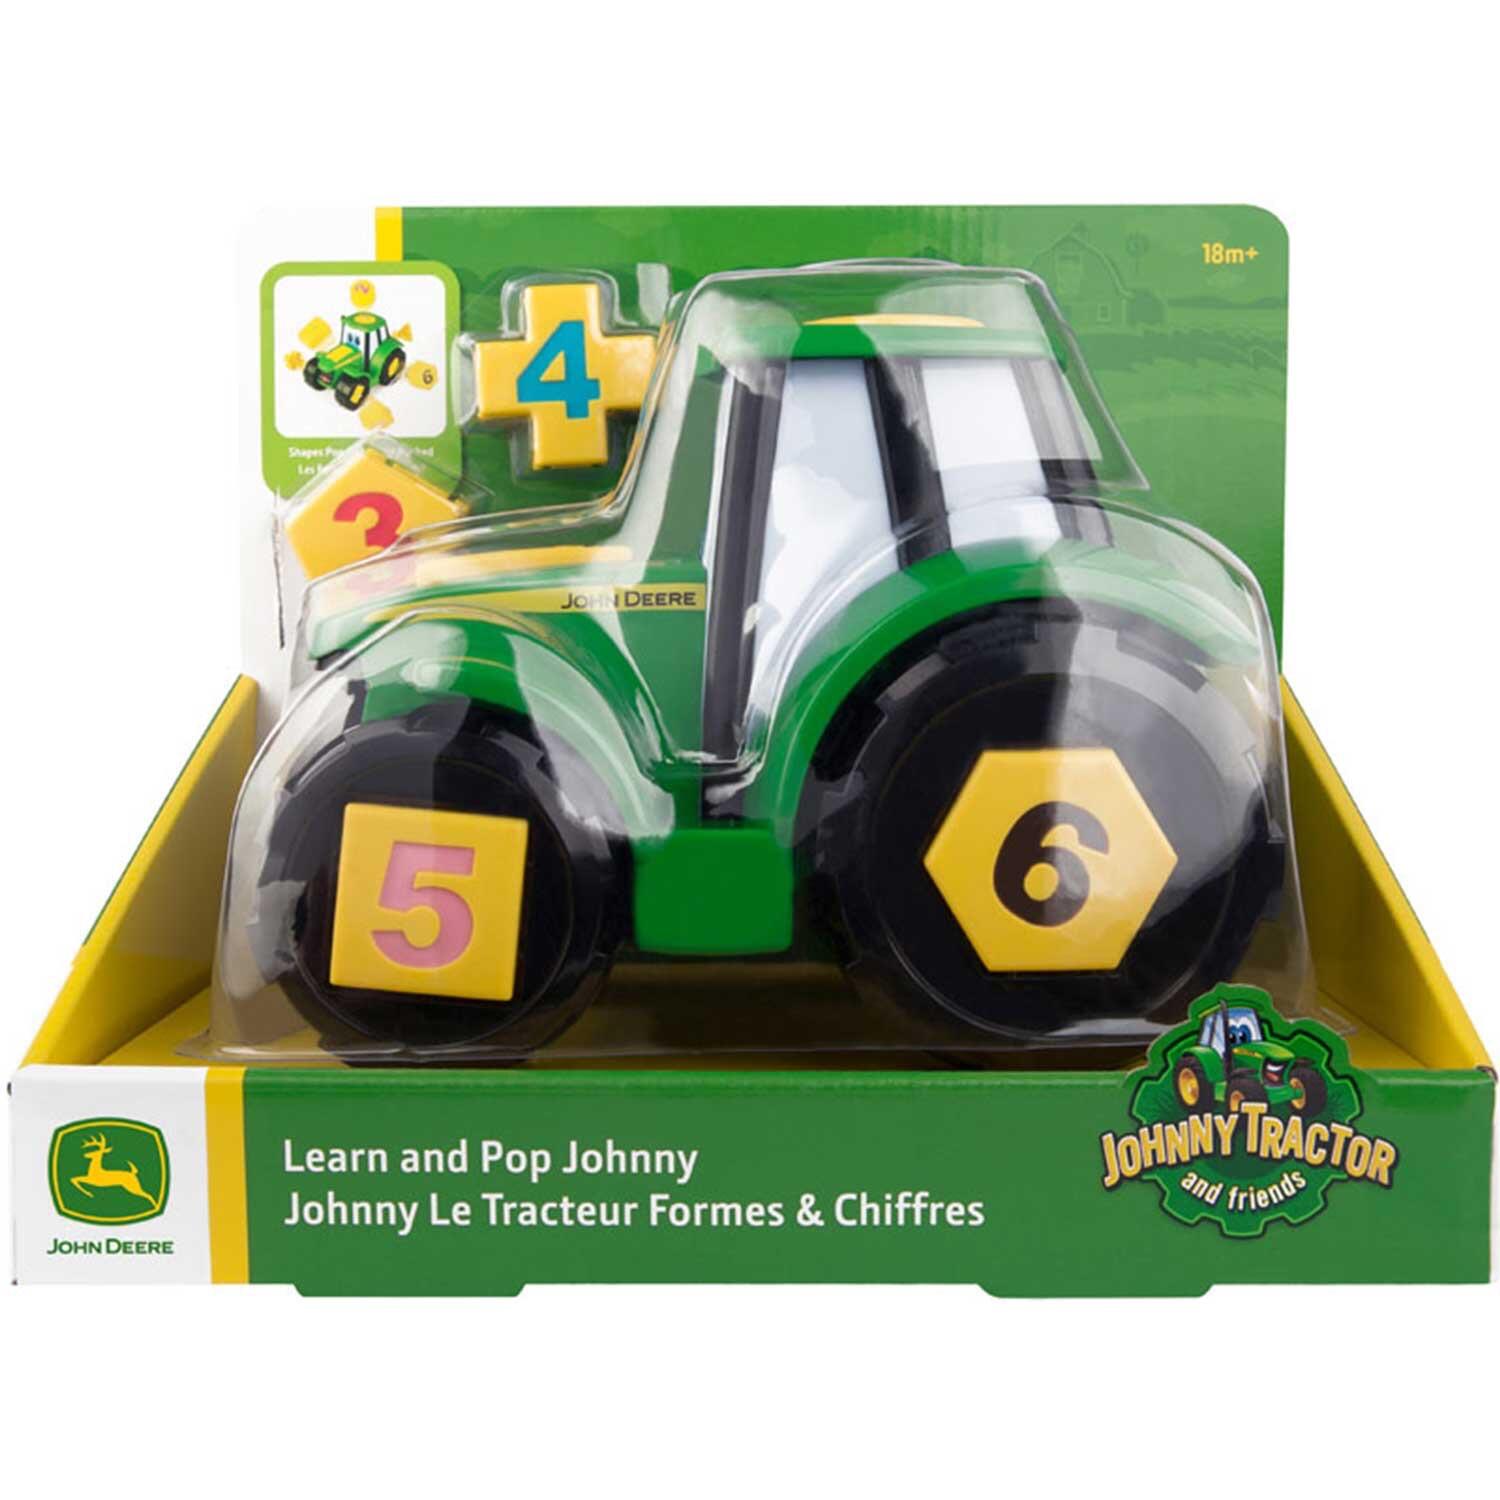 John Deere Johnny Tractor Learn And Pop